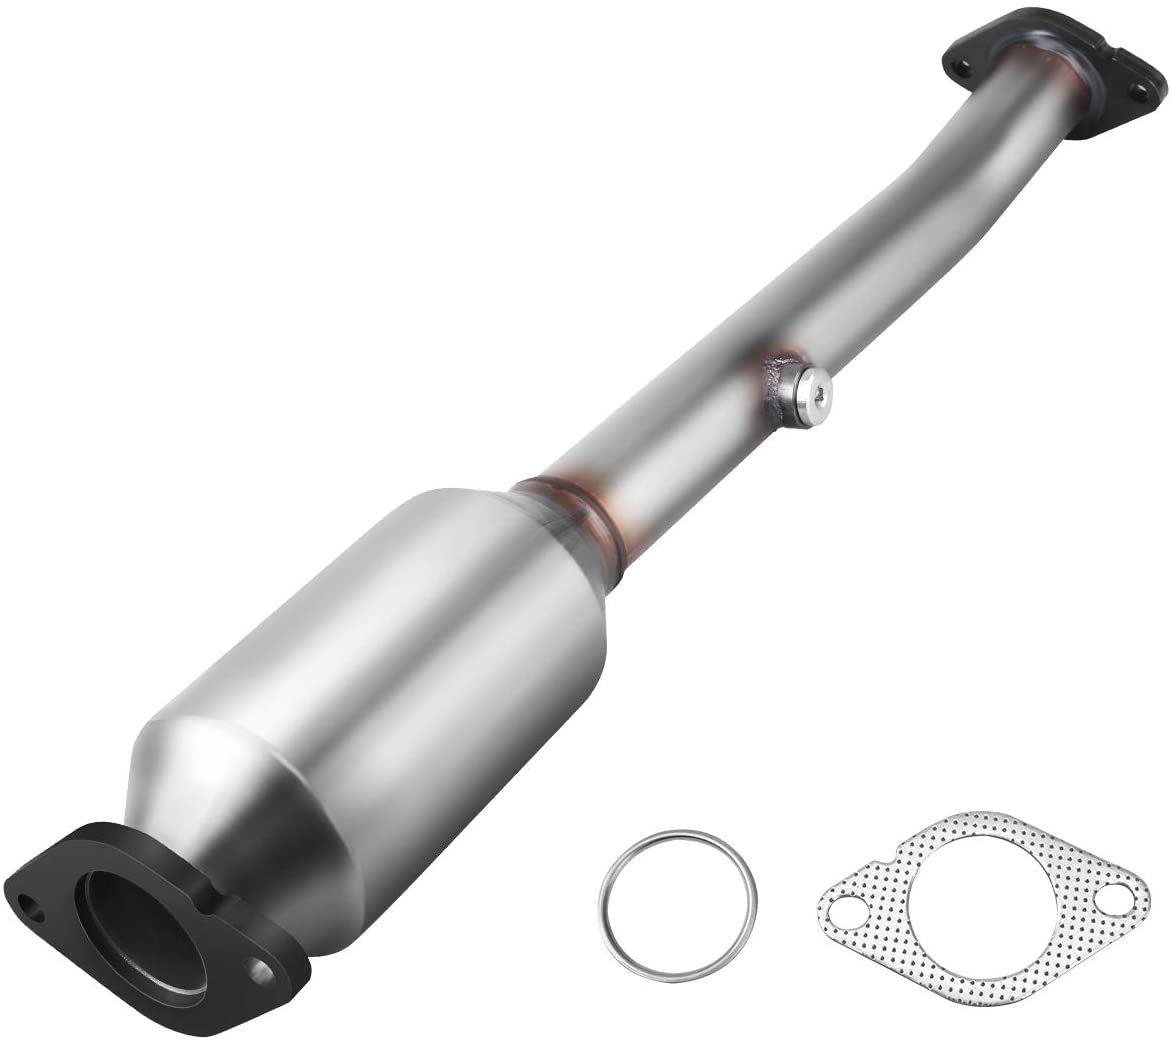 Catalytic Converter Compatible with 2005-2017 Nissan Frontier Pathfinder Xterra NV1500 4.0L Driver Side Direct-Fit High Flow Series (EPA Compliant)